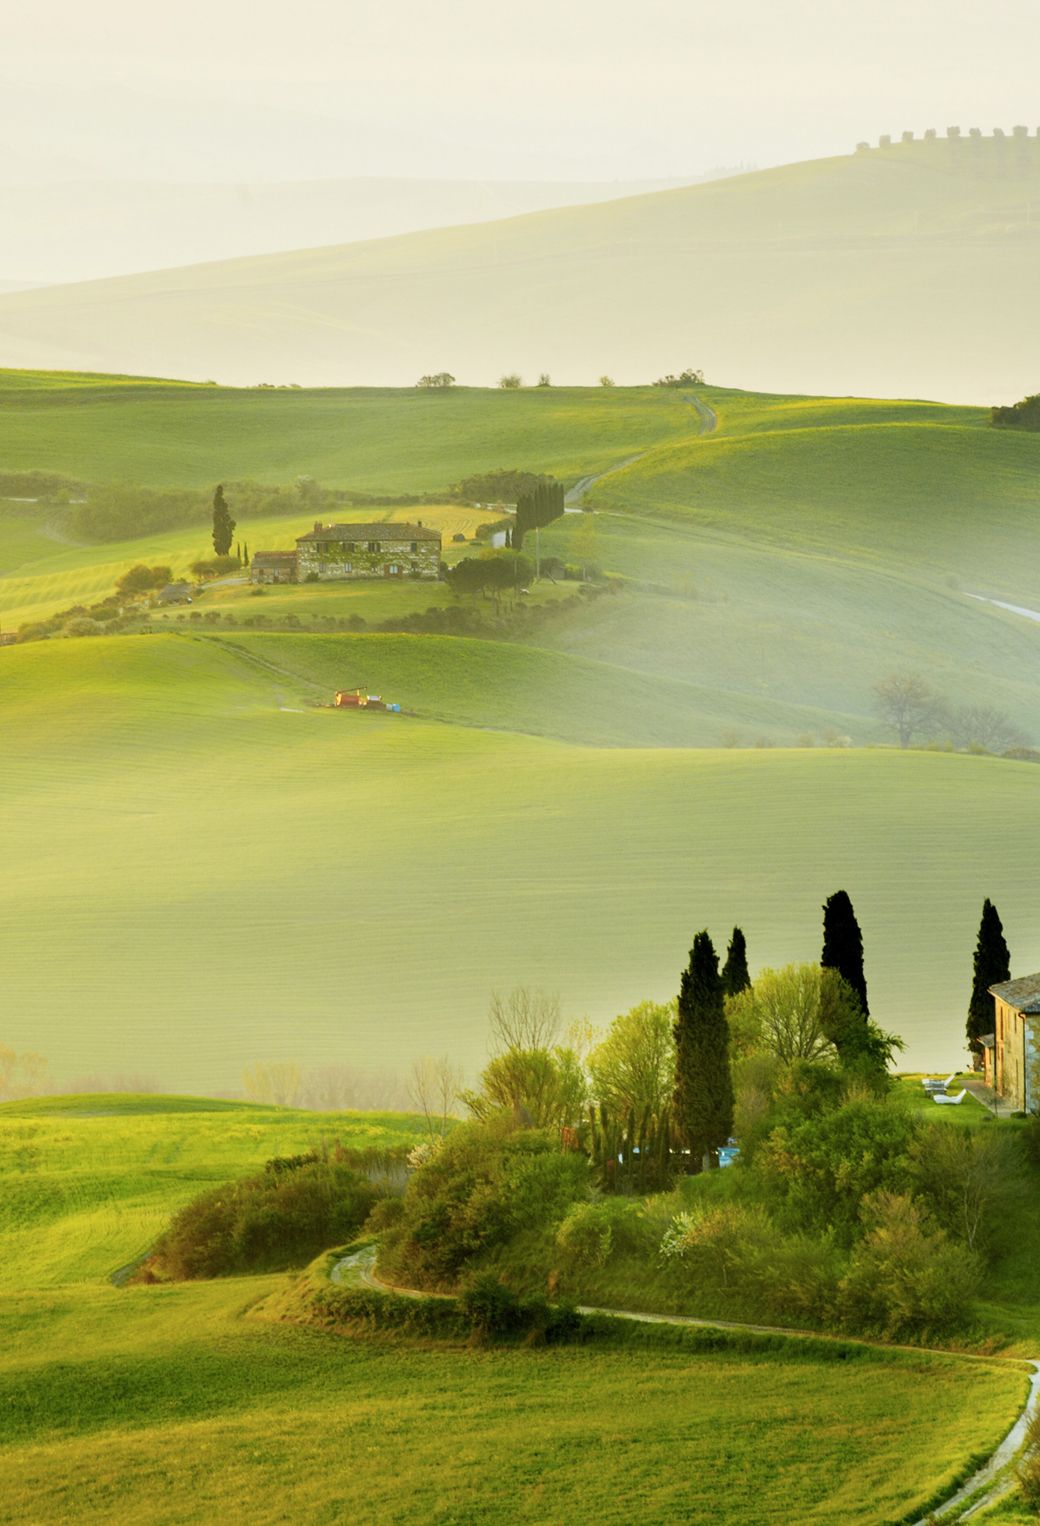 Tuscany Spring Wallpaper for iPhone Pro Max, X, 6